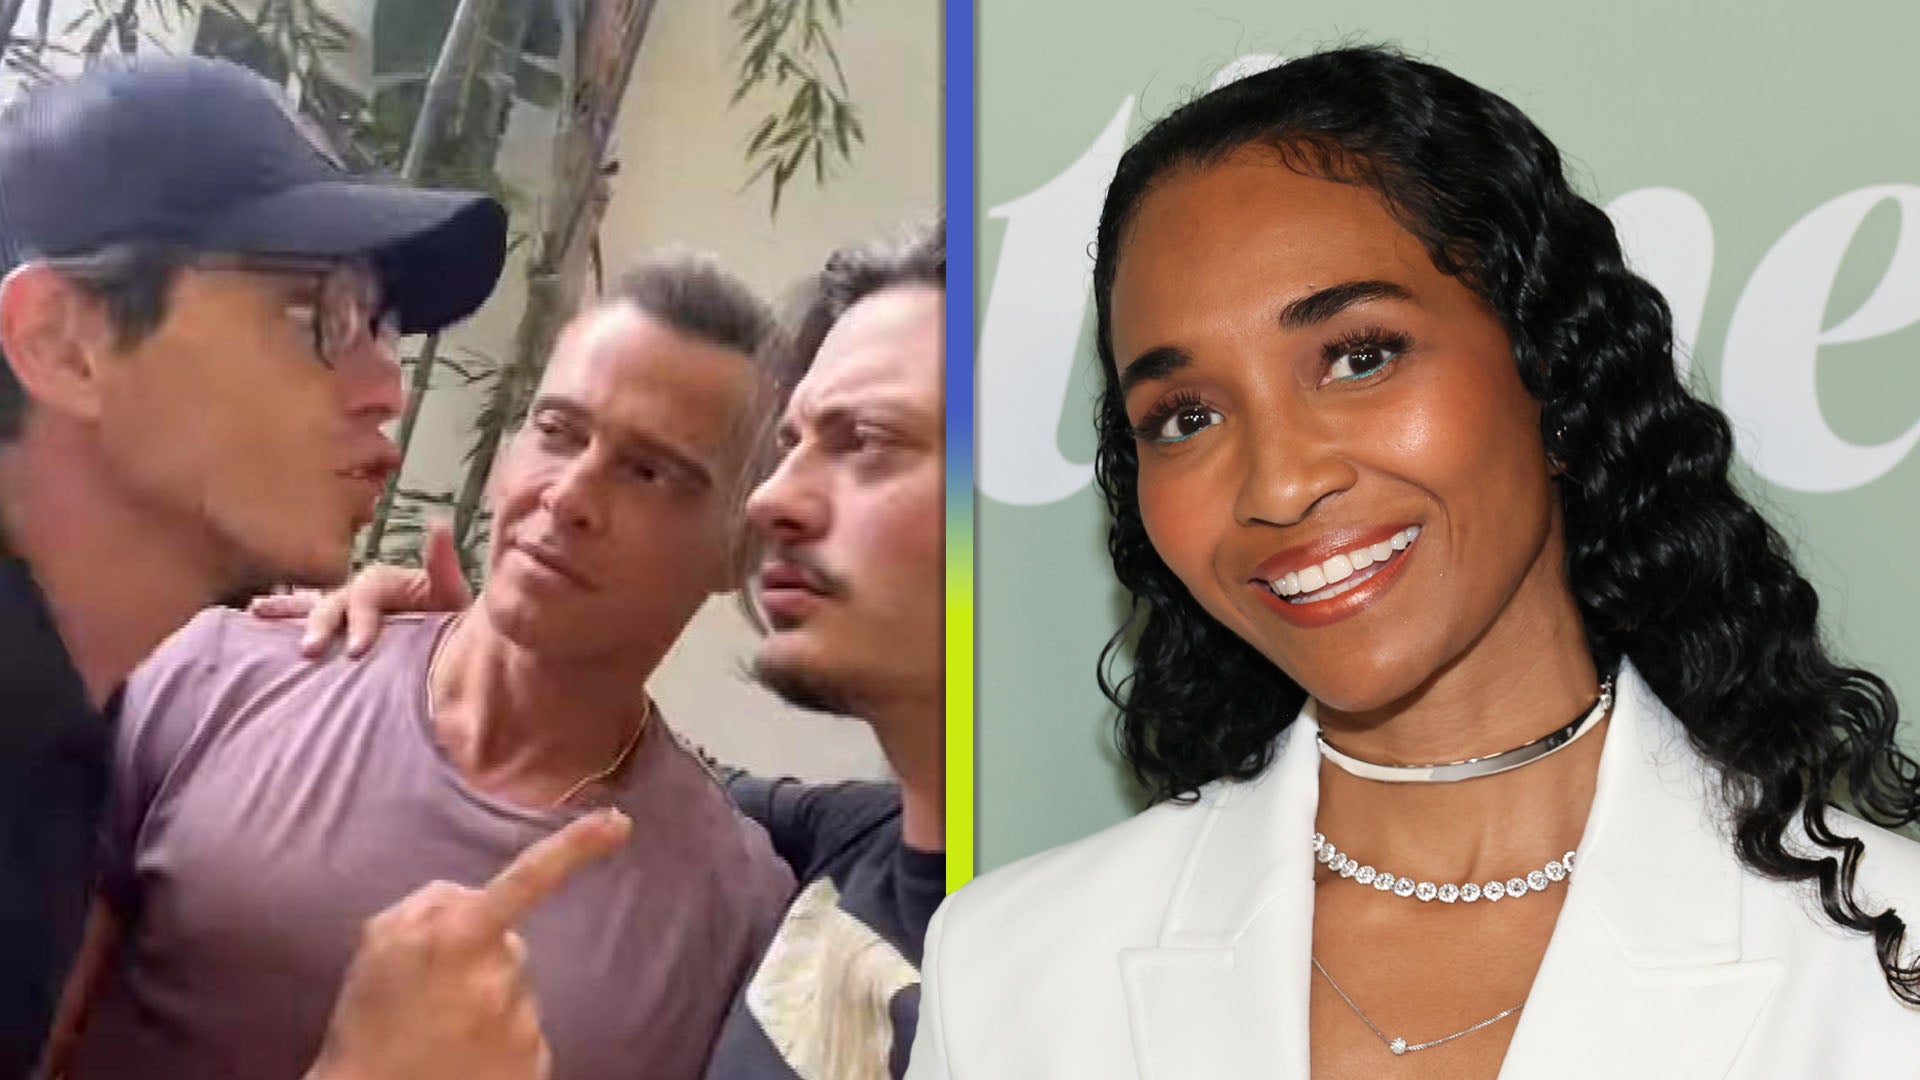 Chilli Reacts to Matthew Lawrence Annoying His Brothers With TLC Lyrics